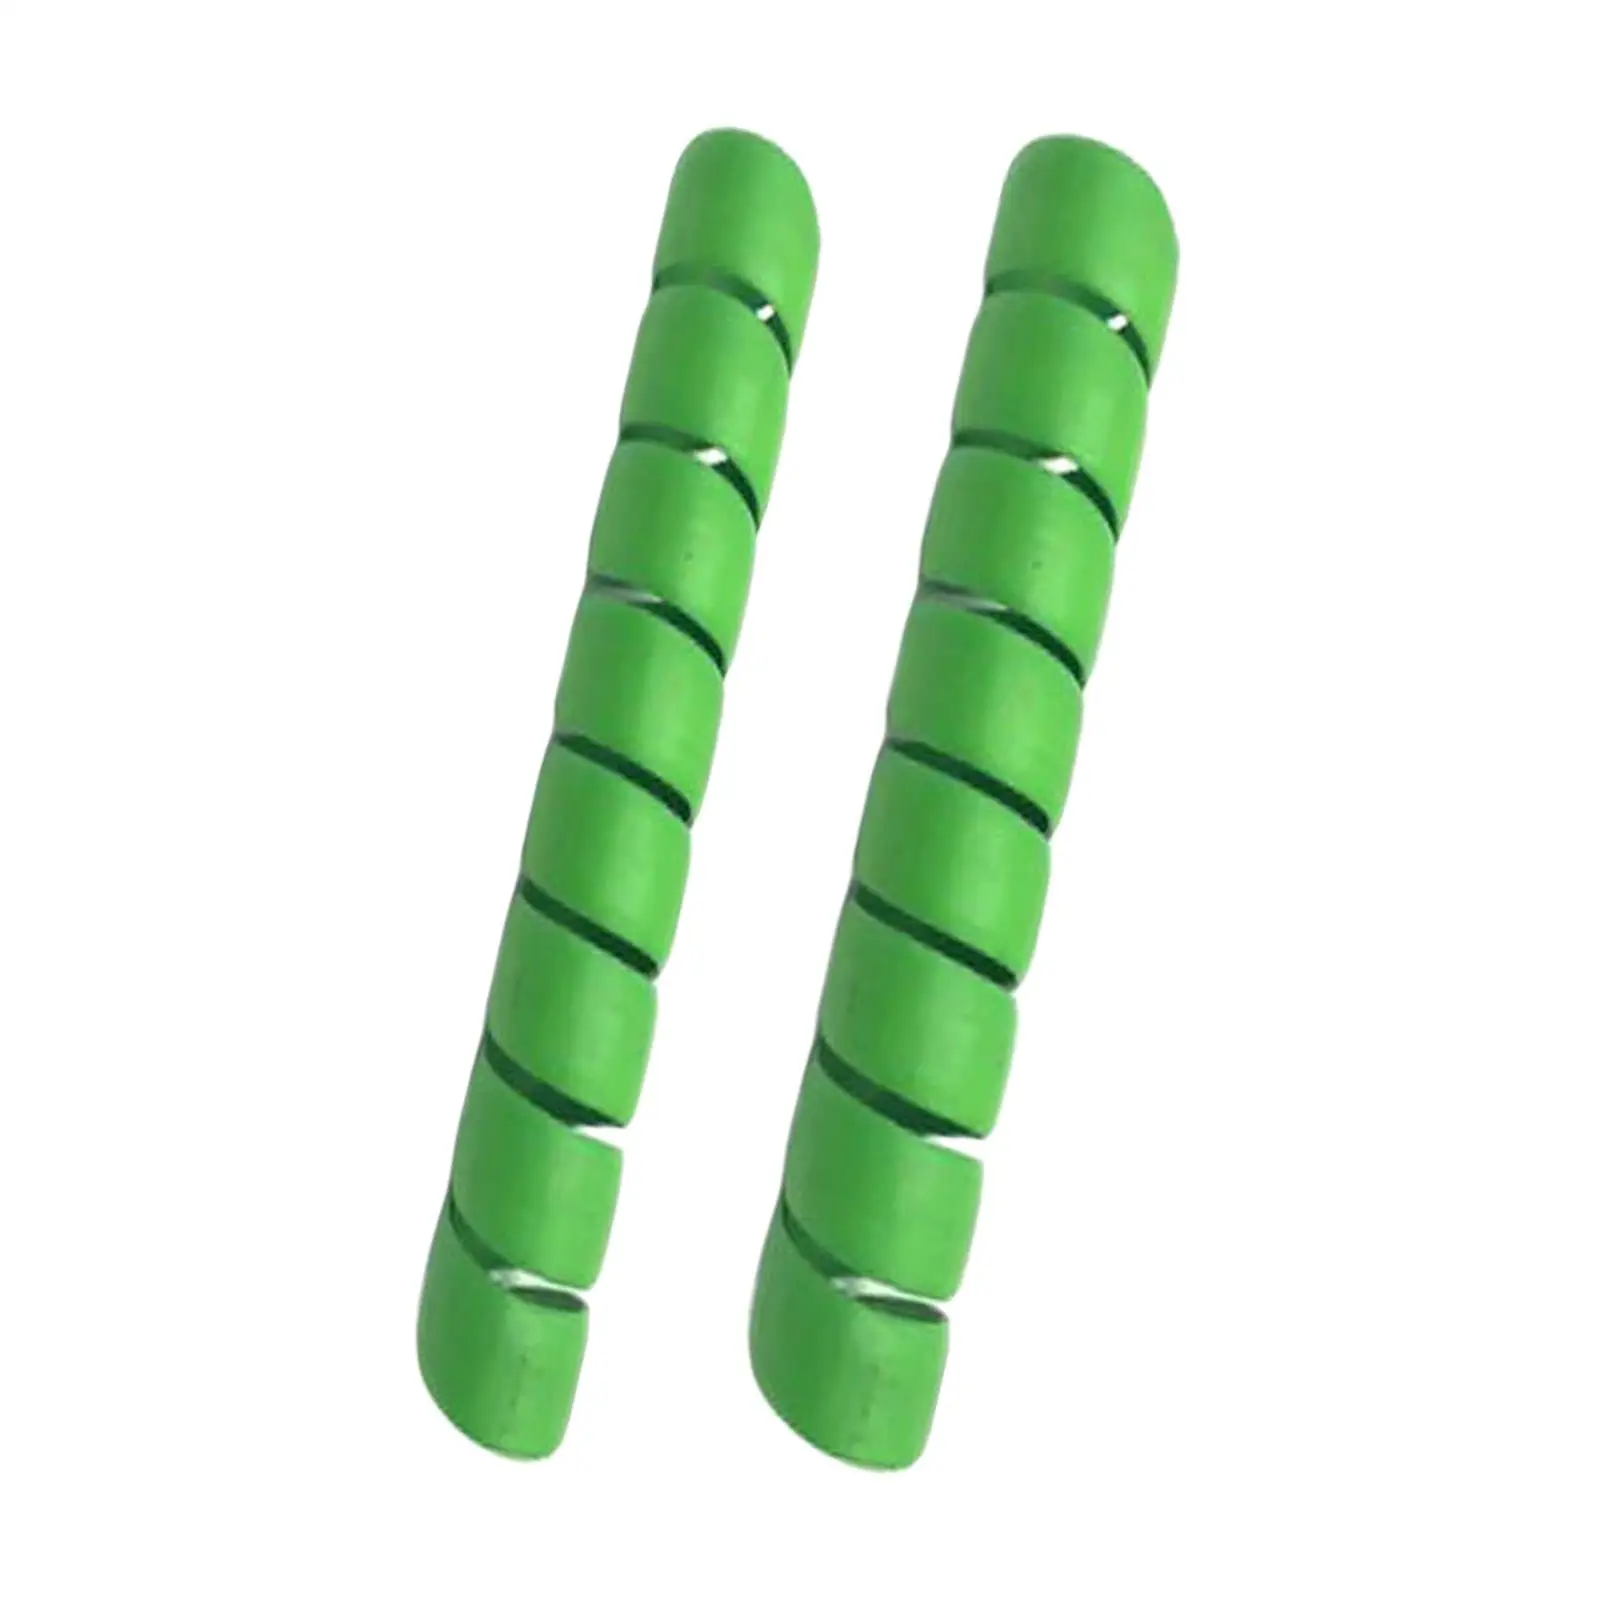 2Pcs Tree Trunk Protector Weather Resistant Portable Prevent Damage Tree Protection Spiral Tree Guard Protect Saplings Plants